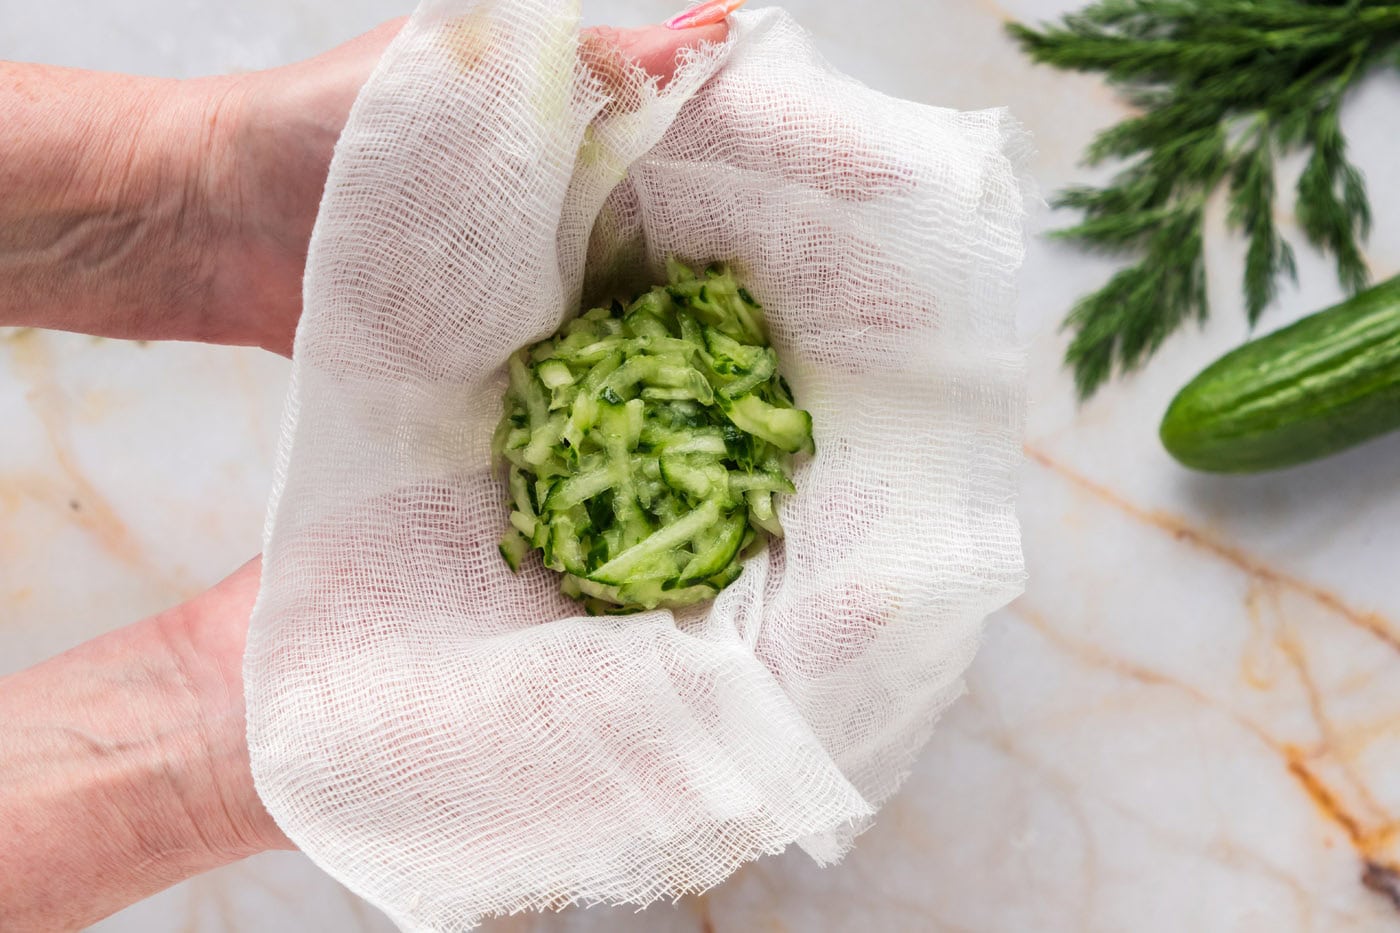 shredded cucumber in a cheesecloth